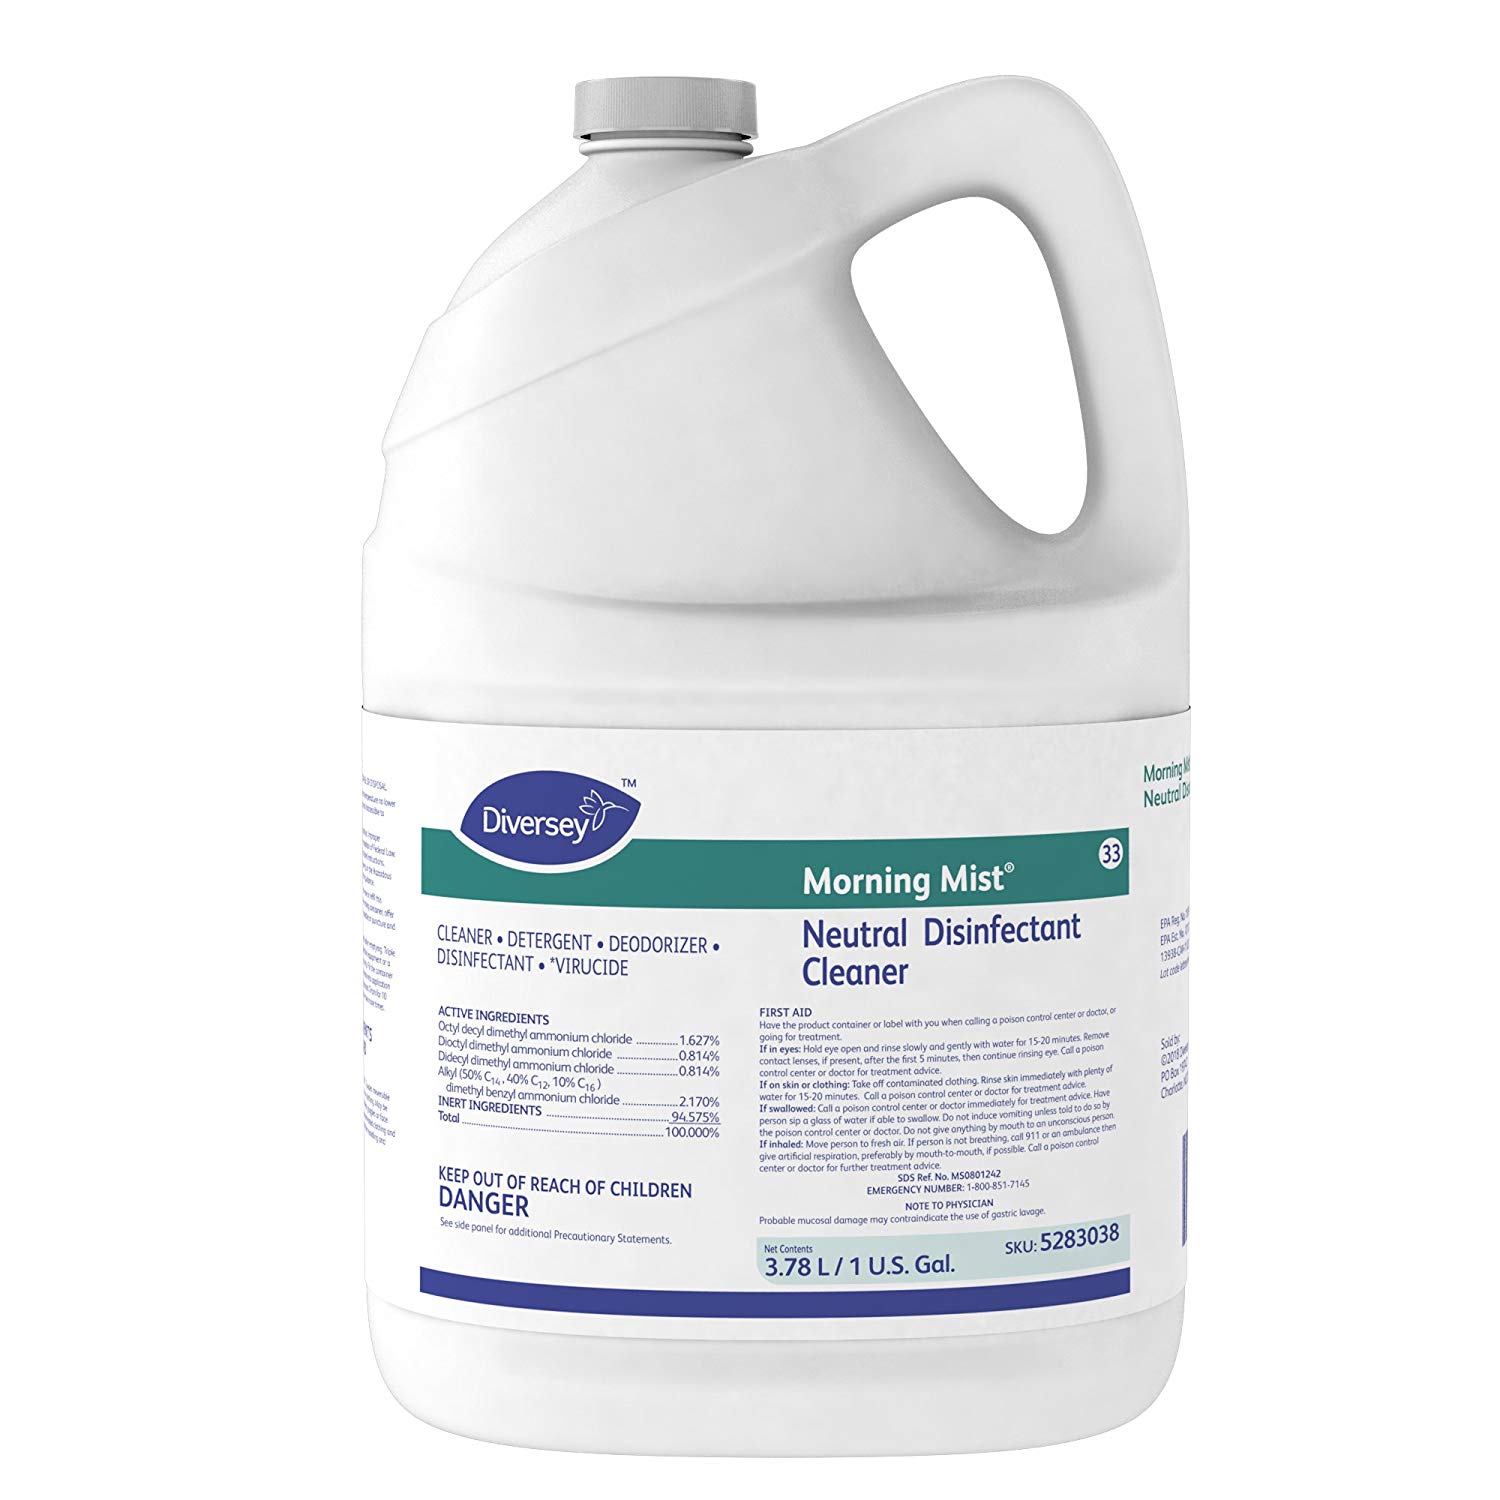 Diversey Morning Mist Neutral Disinfectant Cleaner - 1 Gallon, 4/Case